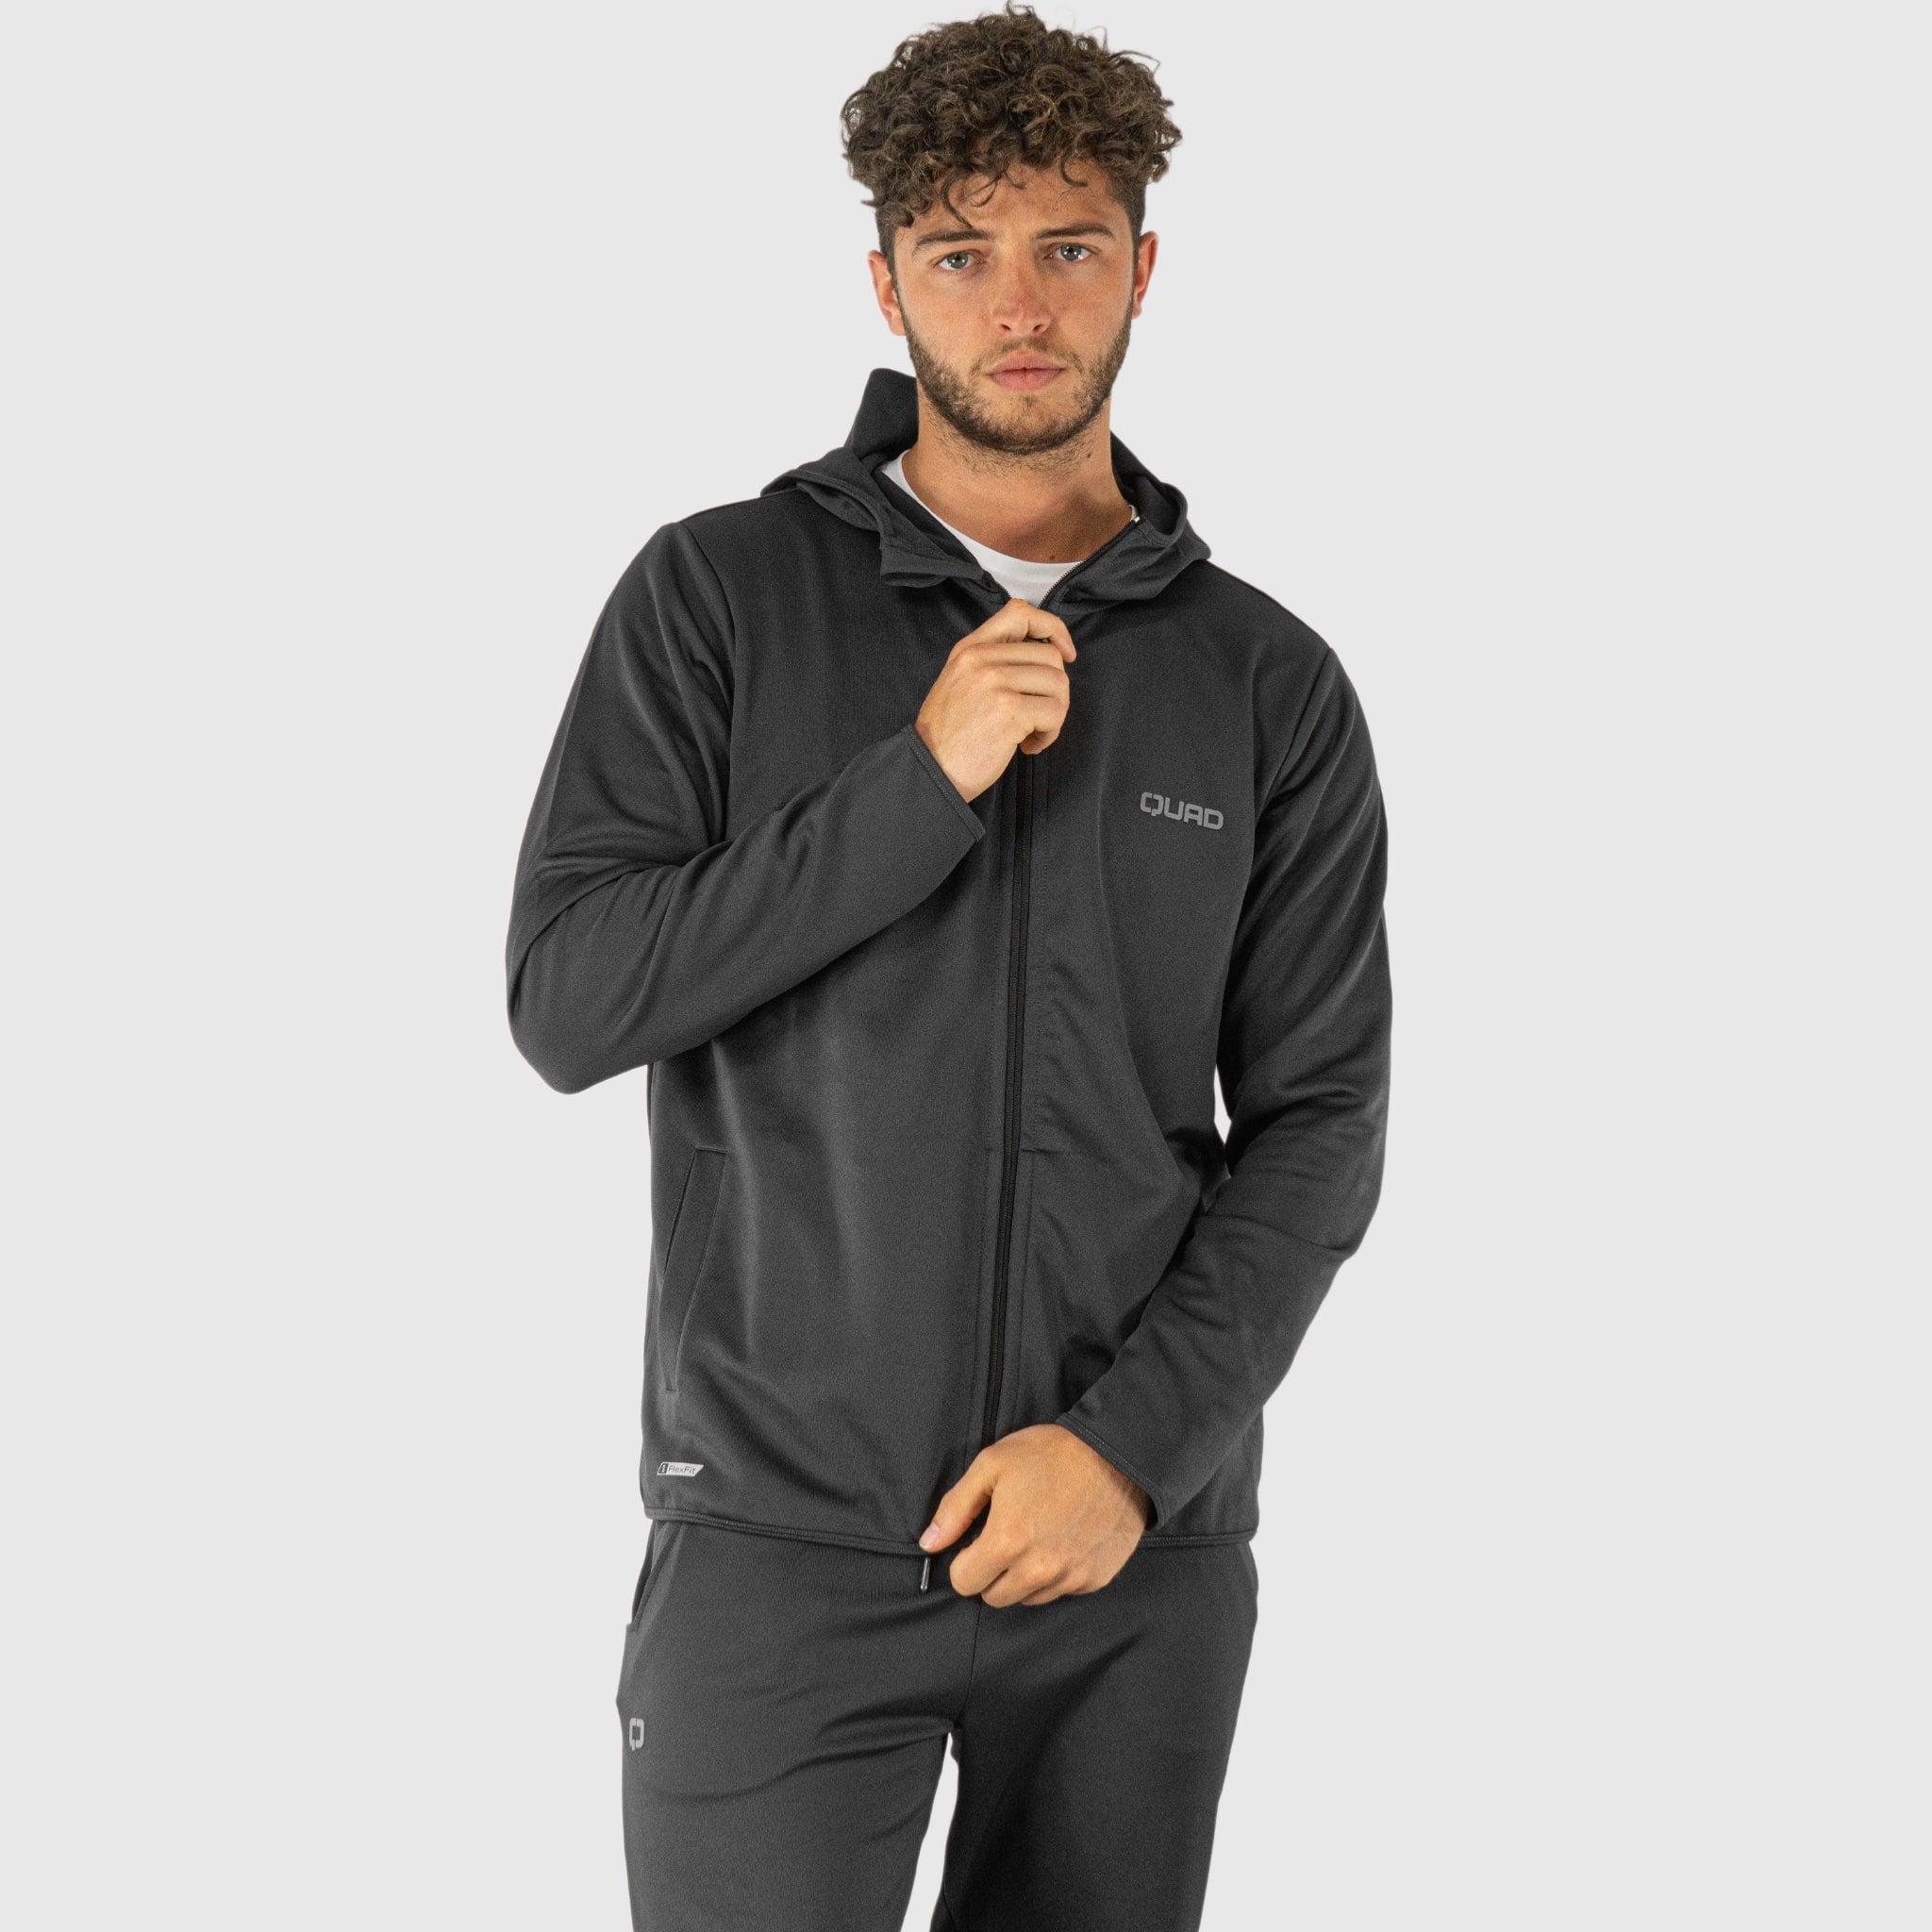 Quad Padel First-Class Tracksuit front view